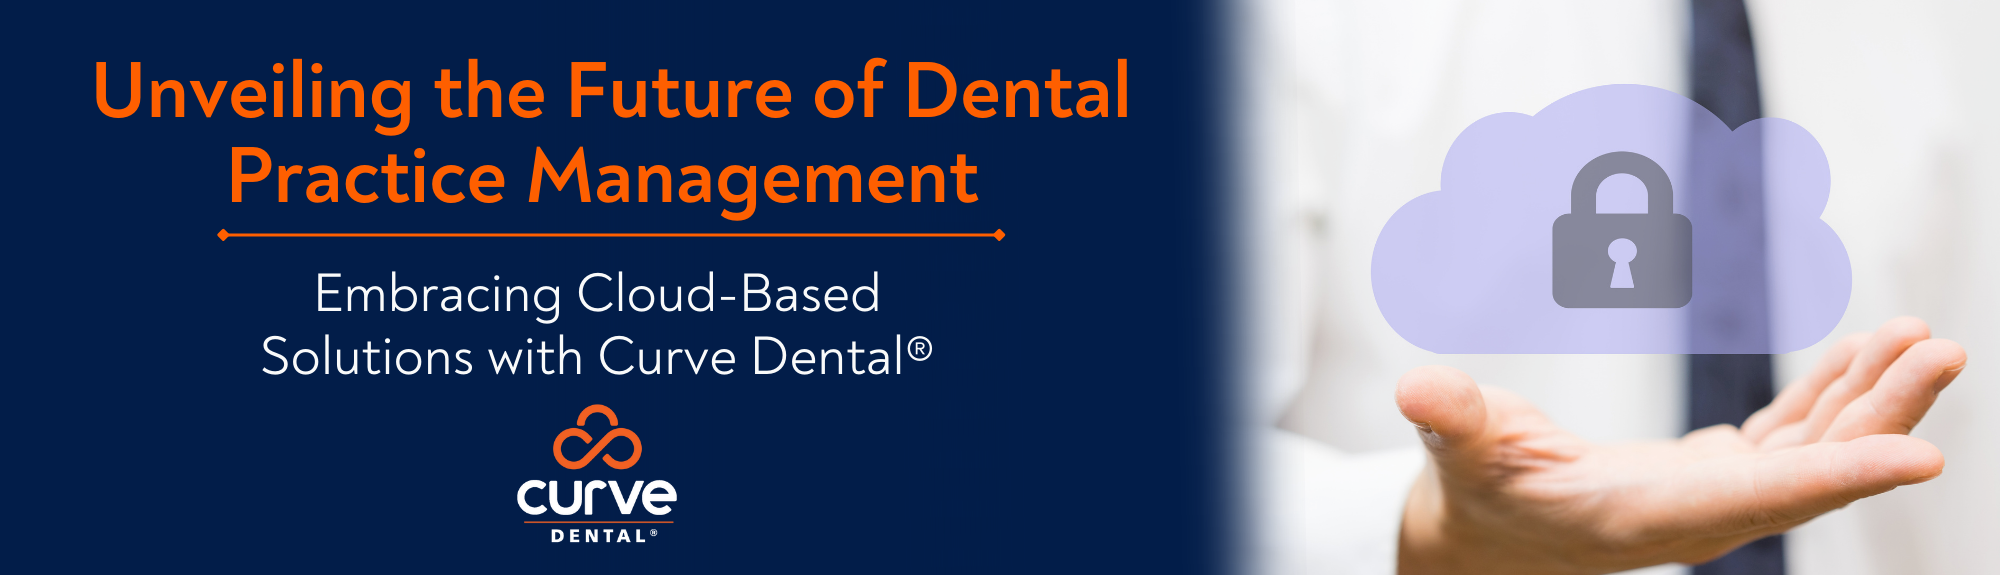 Unveiling the Future of Dental Practice Management: Embracing Cloud-Based Solutions with Curve Dental®